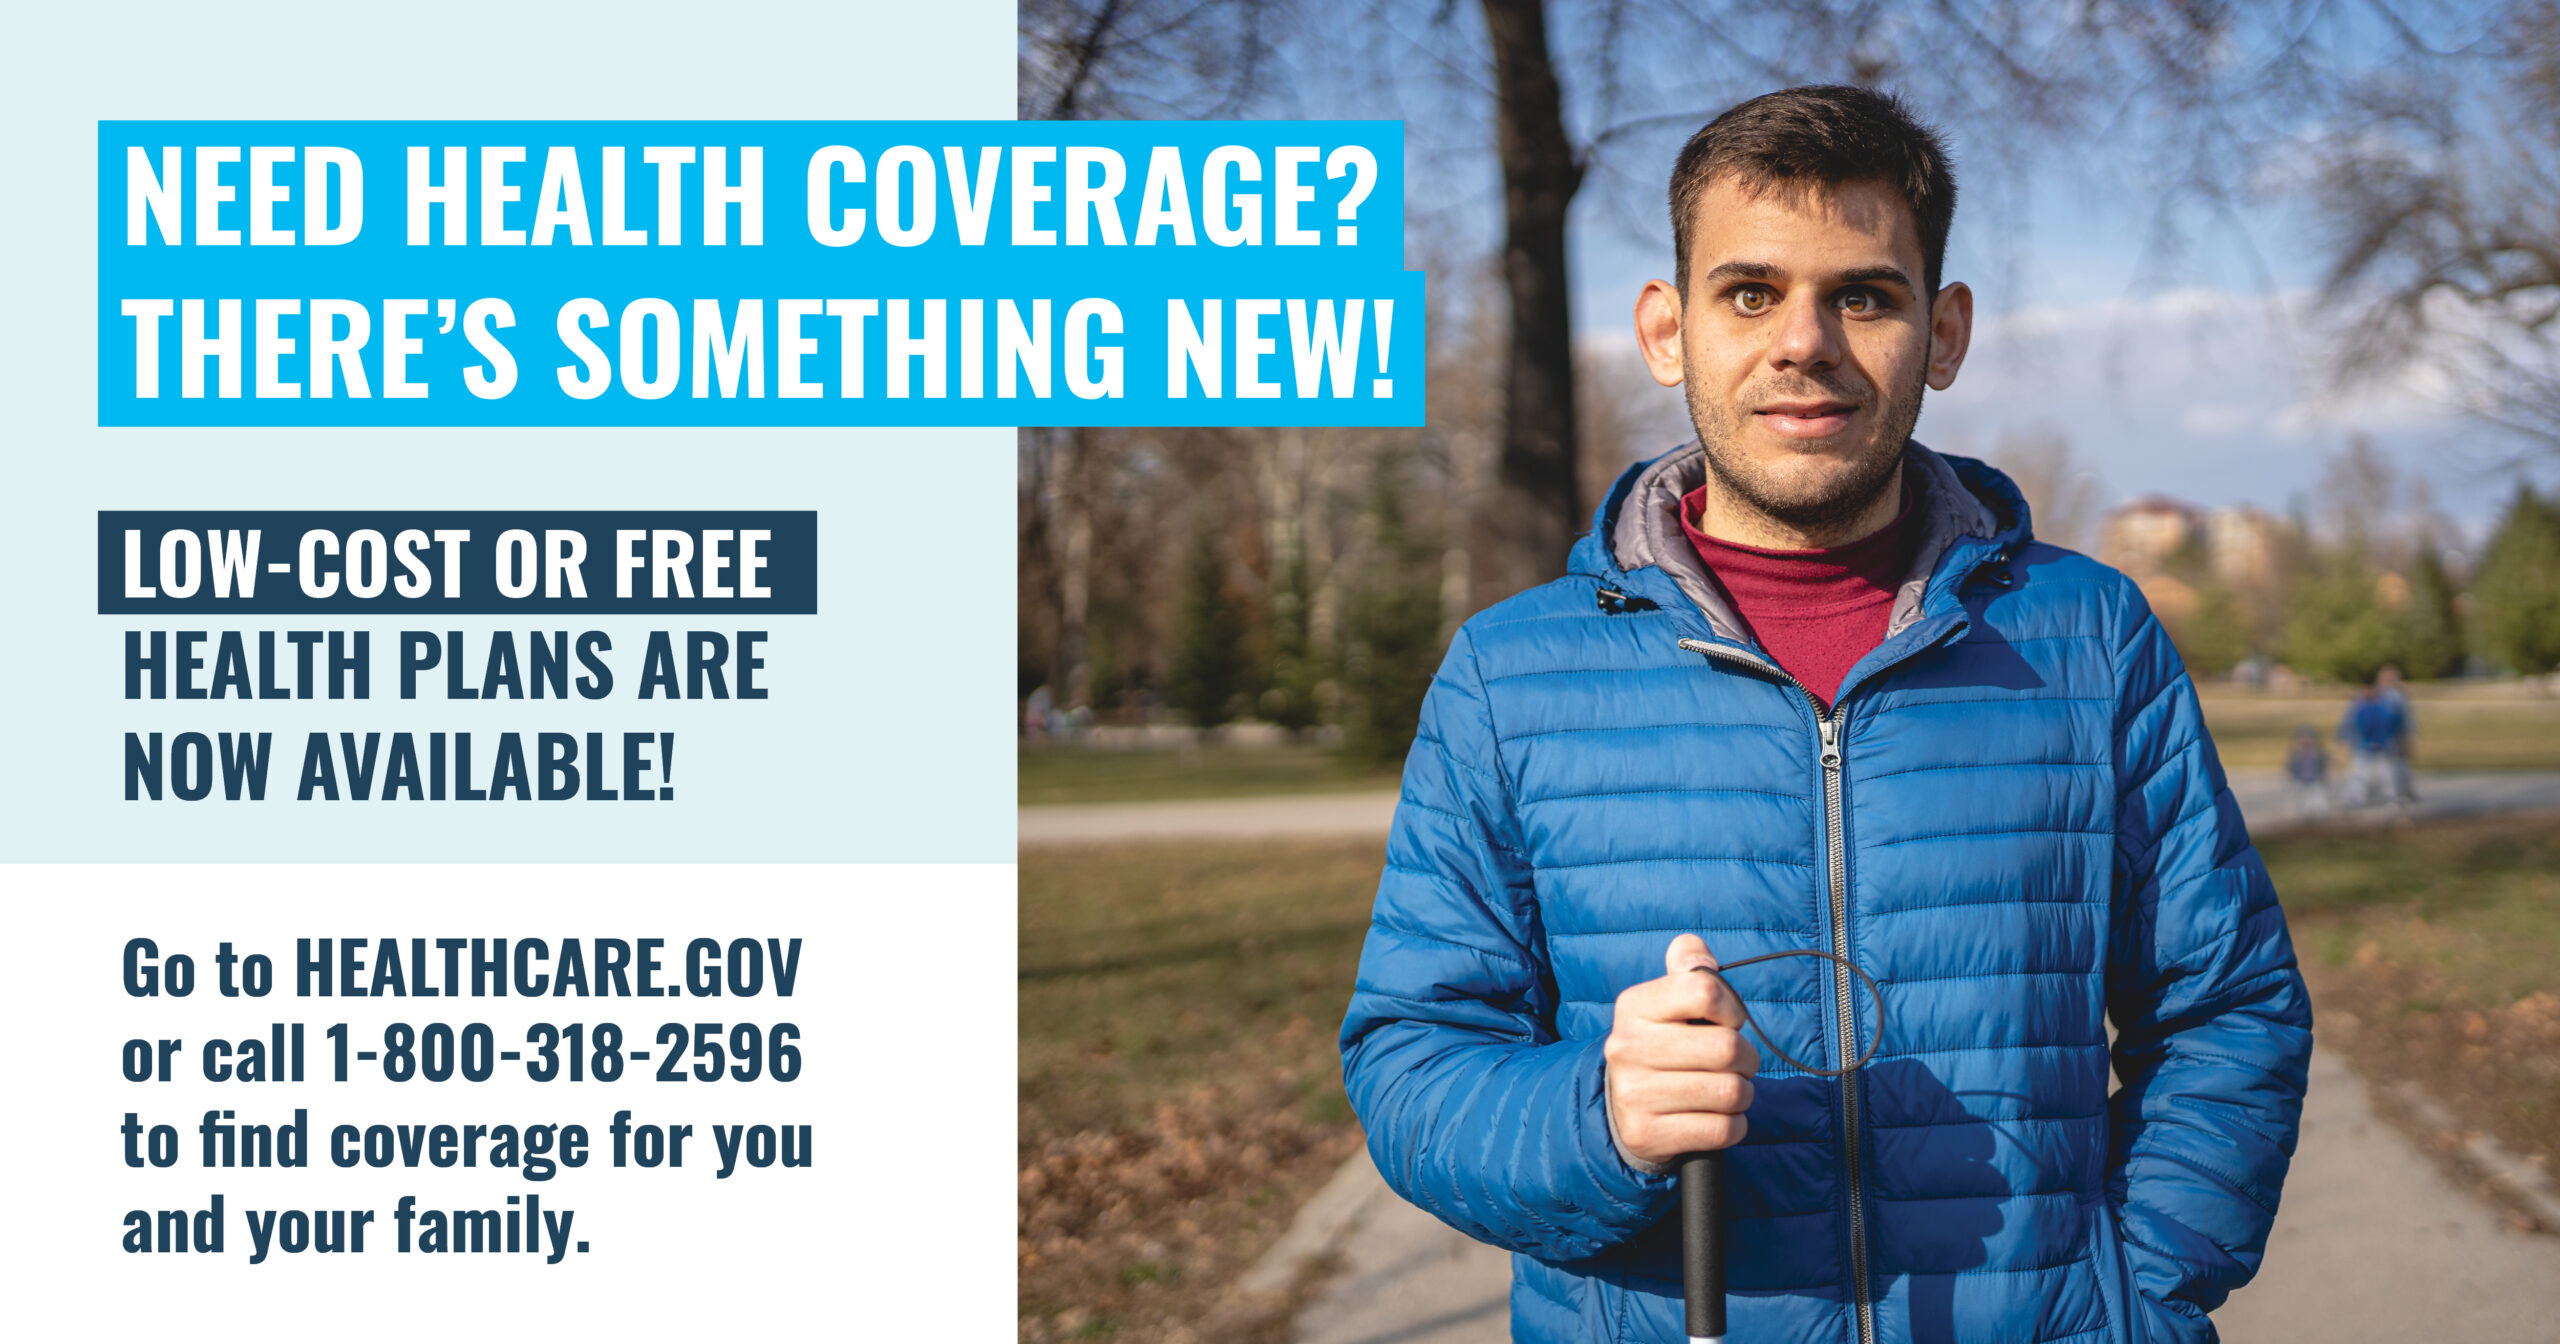 A man holding a guide cane with the message “Need health care coverage? There’s something new! Low-cost or free health plans are now available! Go to healthcare.gov or call 1-800-318-2596 to find coverage for you and your family.